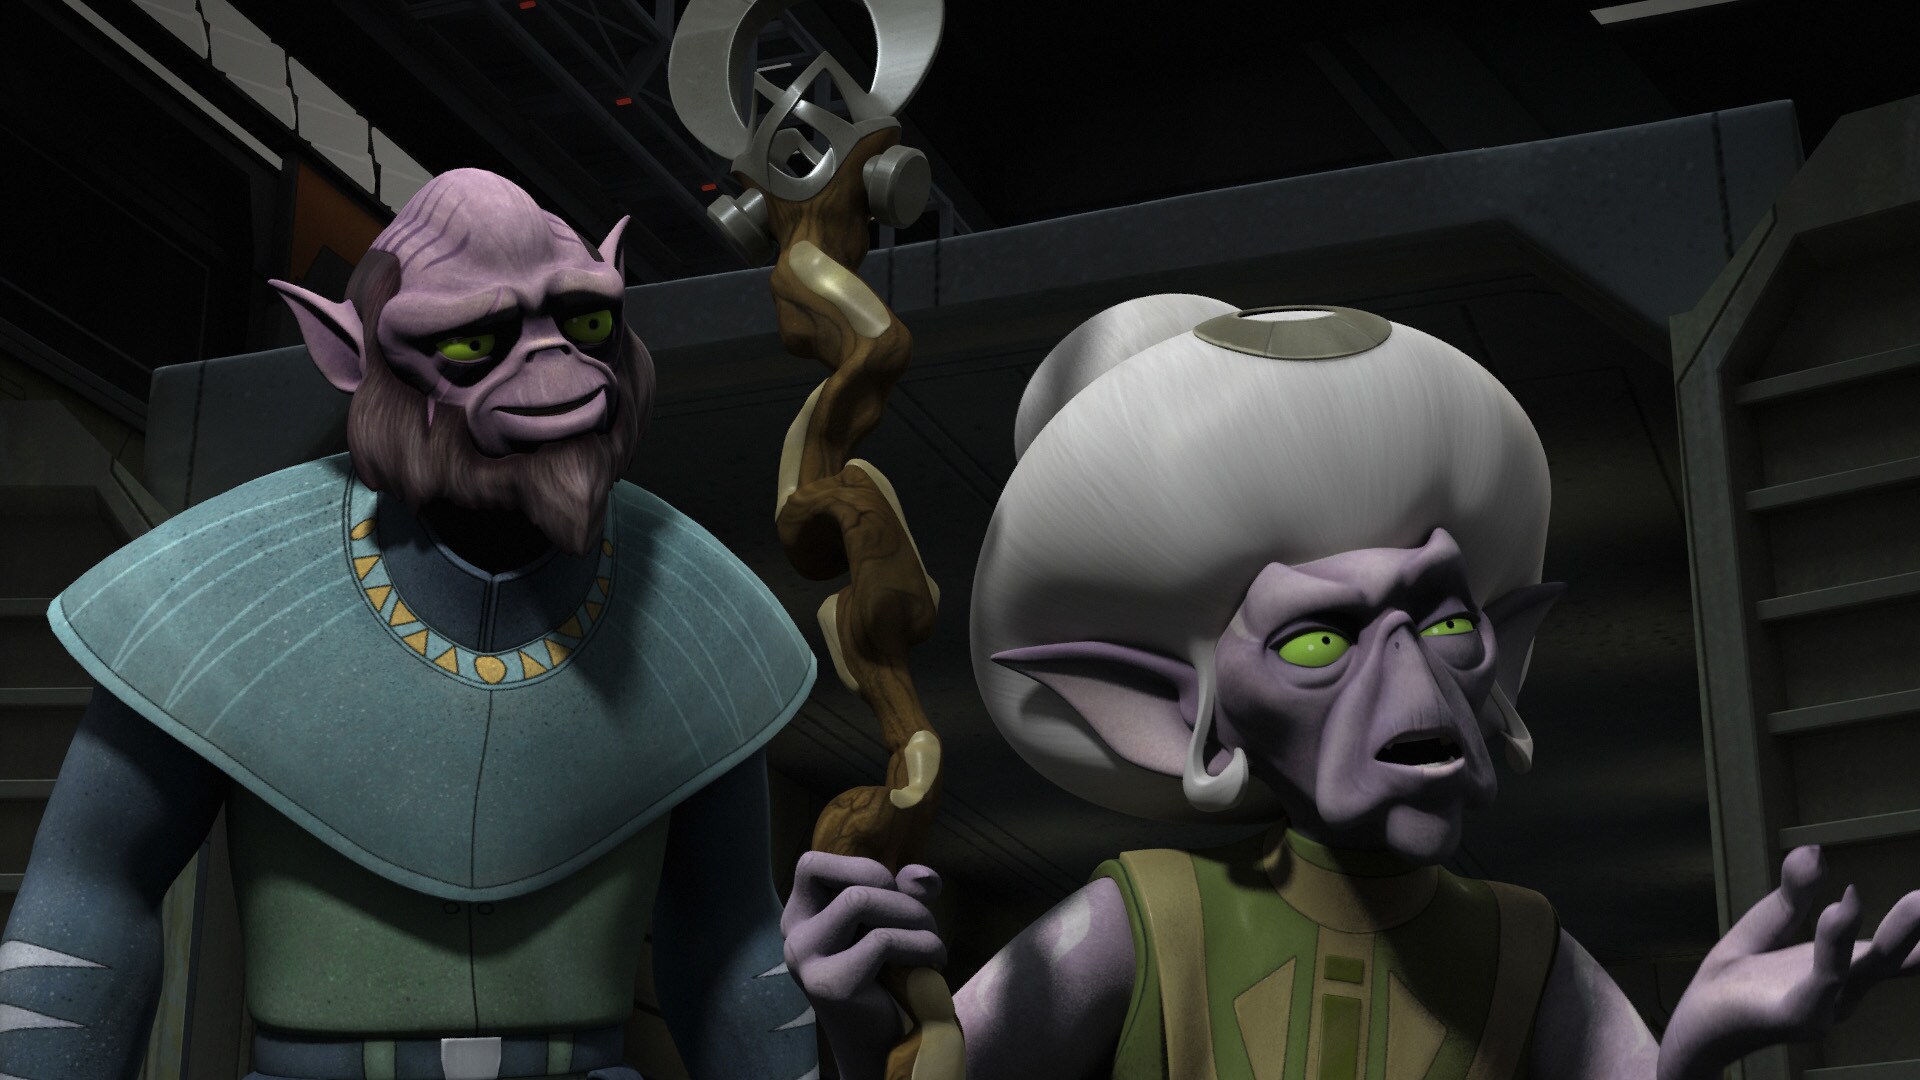 The refugees, meanwhile, know Zeb. "Captain Orrelios!" the male says. They bow in respect. Zeb sa...